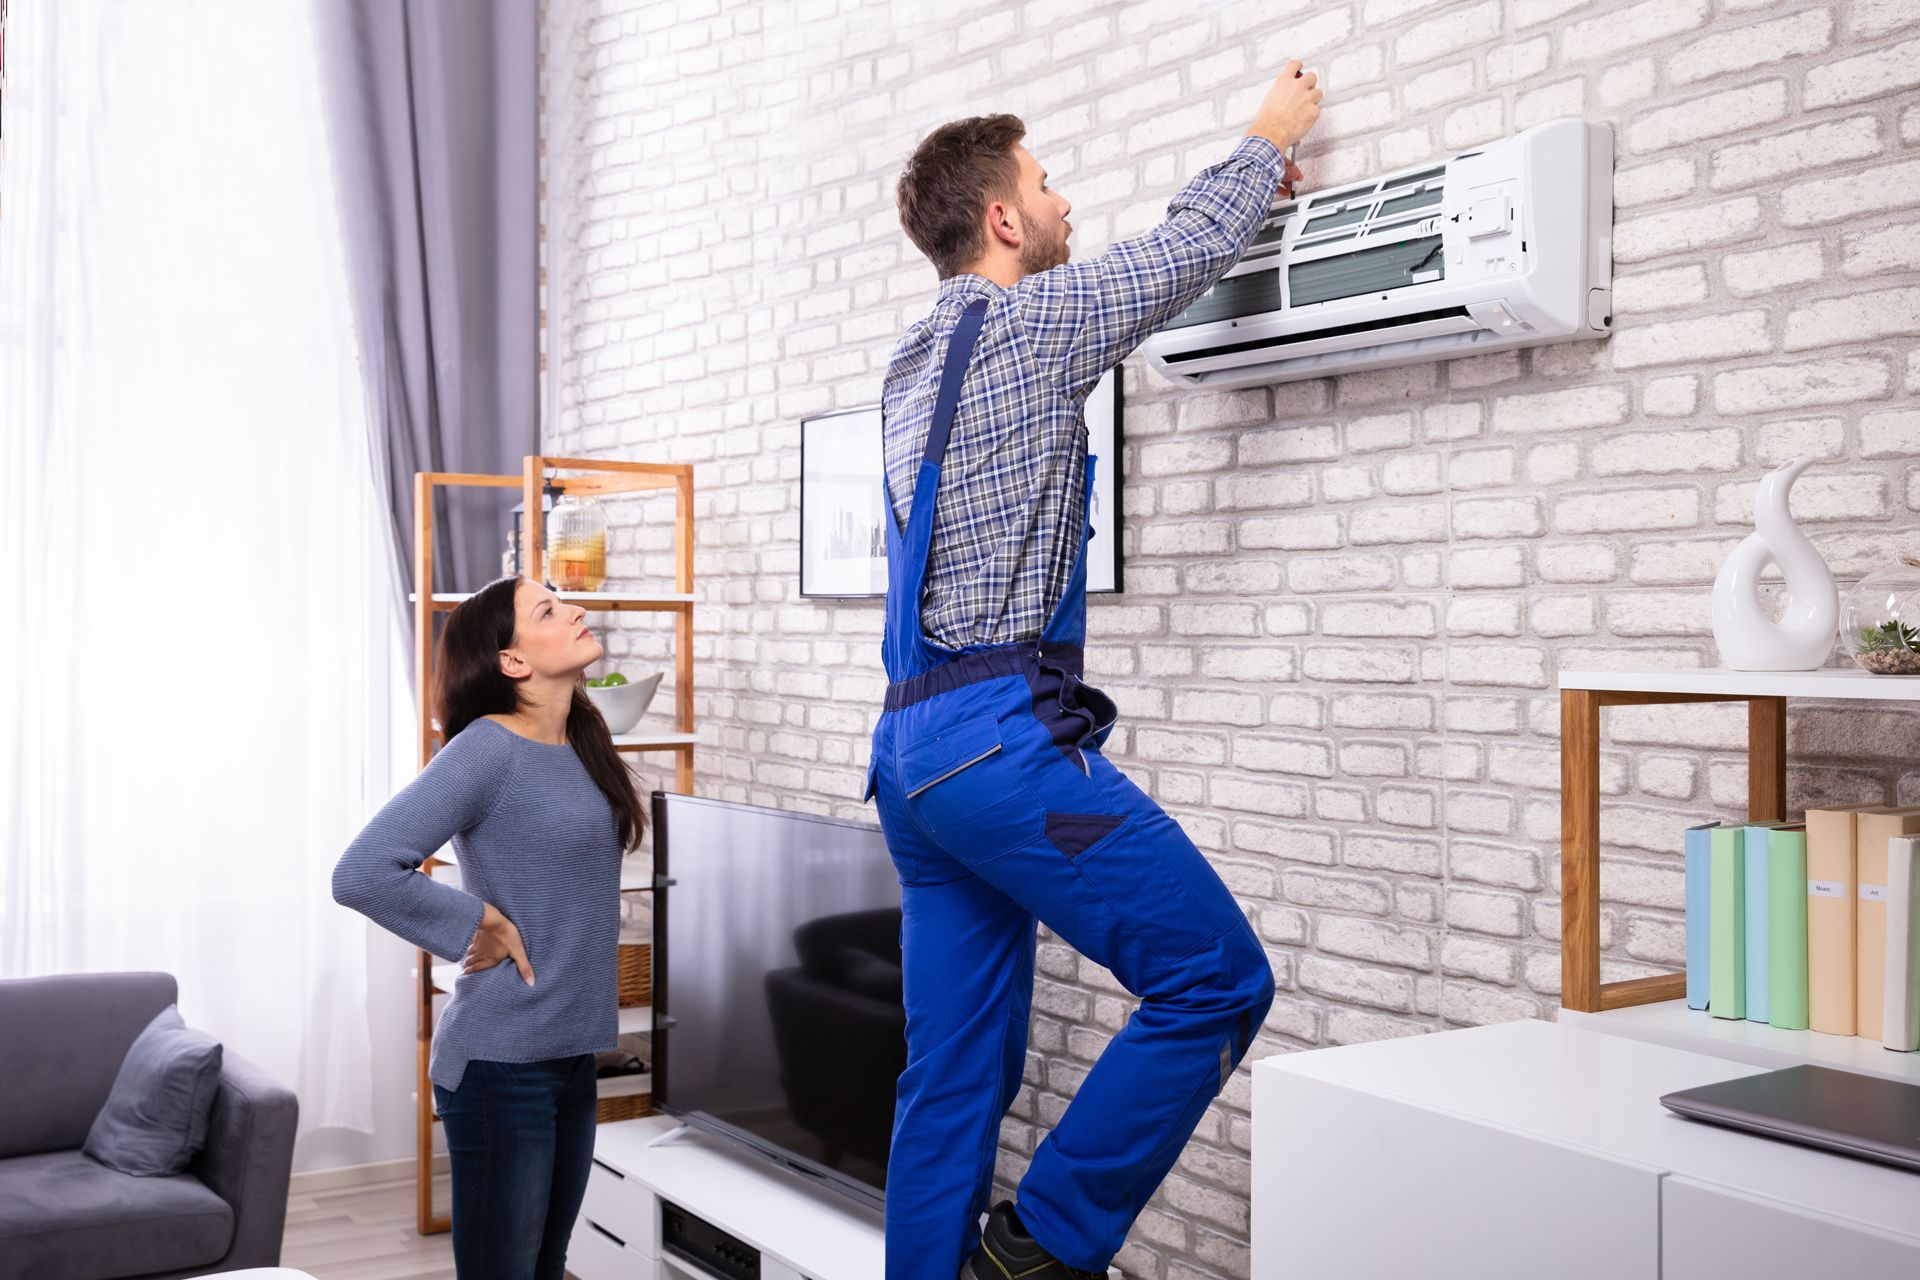 a man is fixing an air conditioner in a living room while a woman looks on